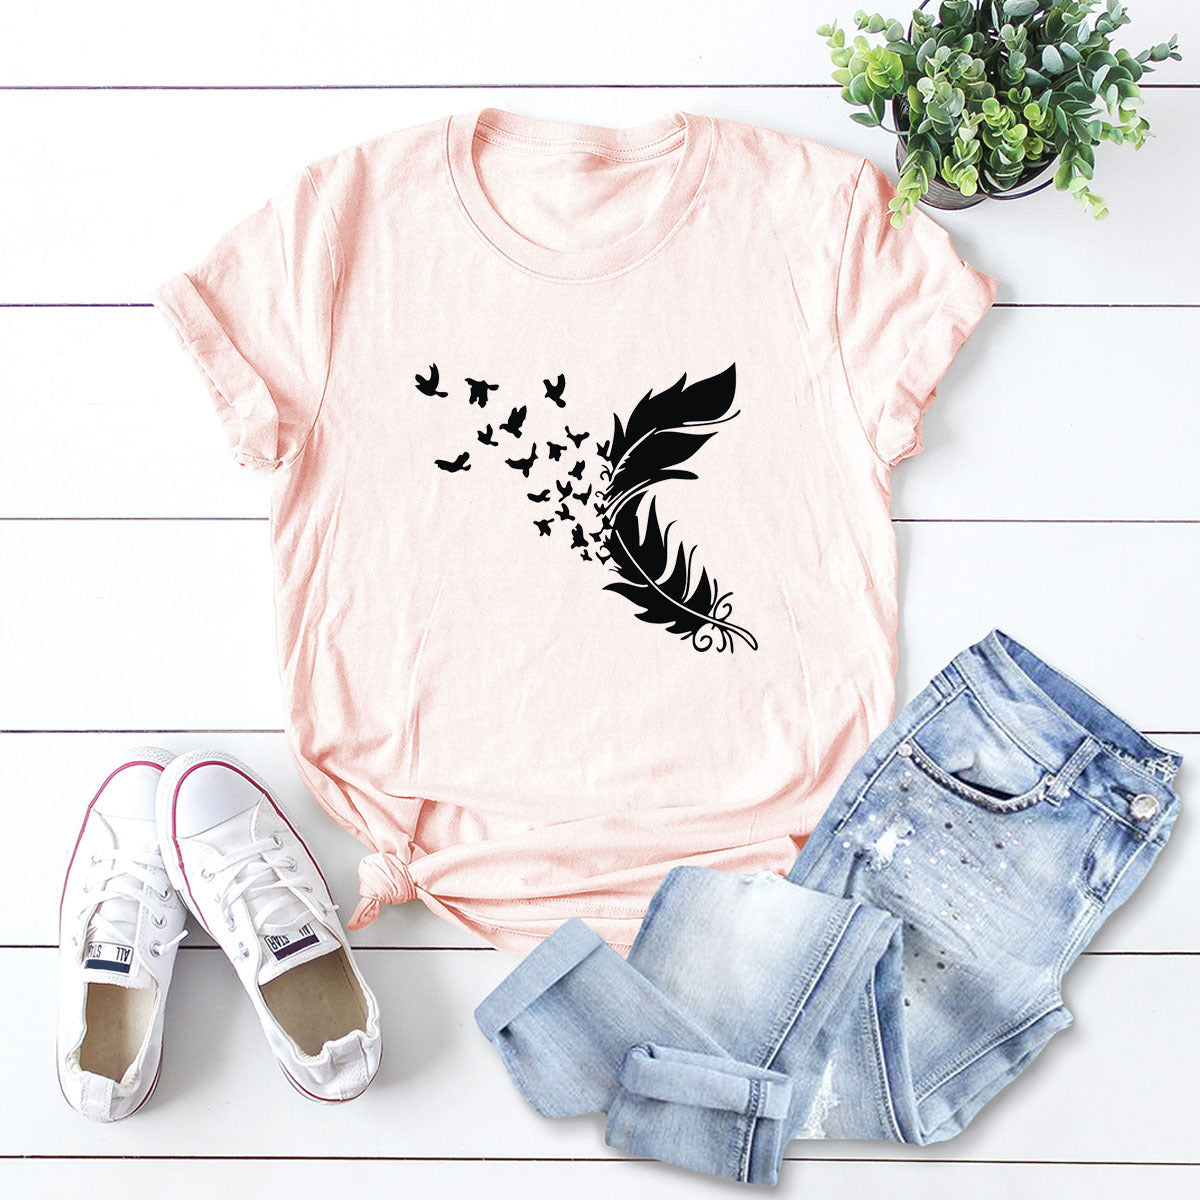 Buy Online Premimum Quality, Trendy and Highly Comfortable Summer Plus Size Women Clothing New Feather Print T-Shirt - FEYONAS